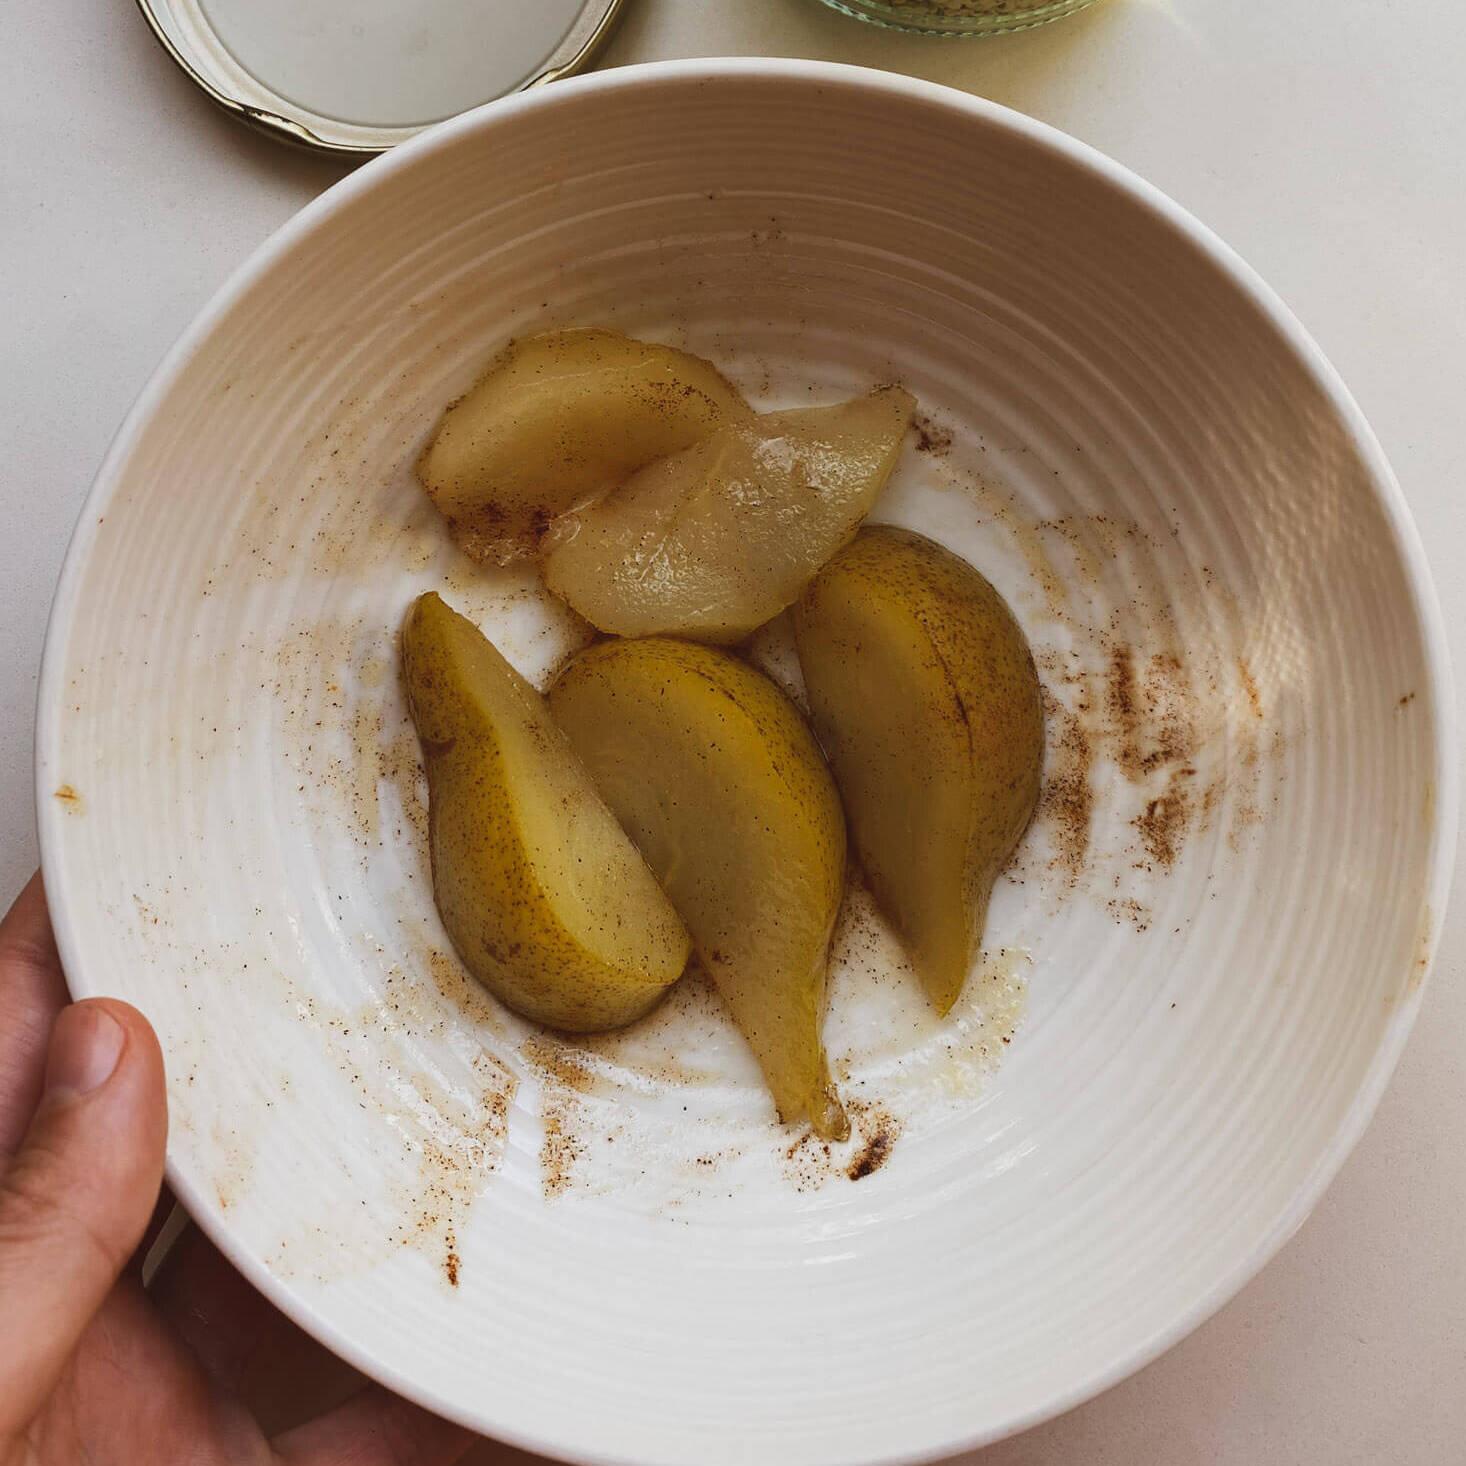 Steamed Pears